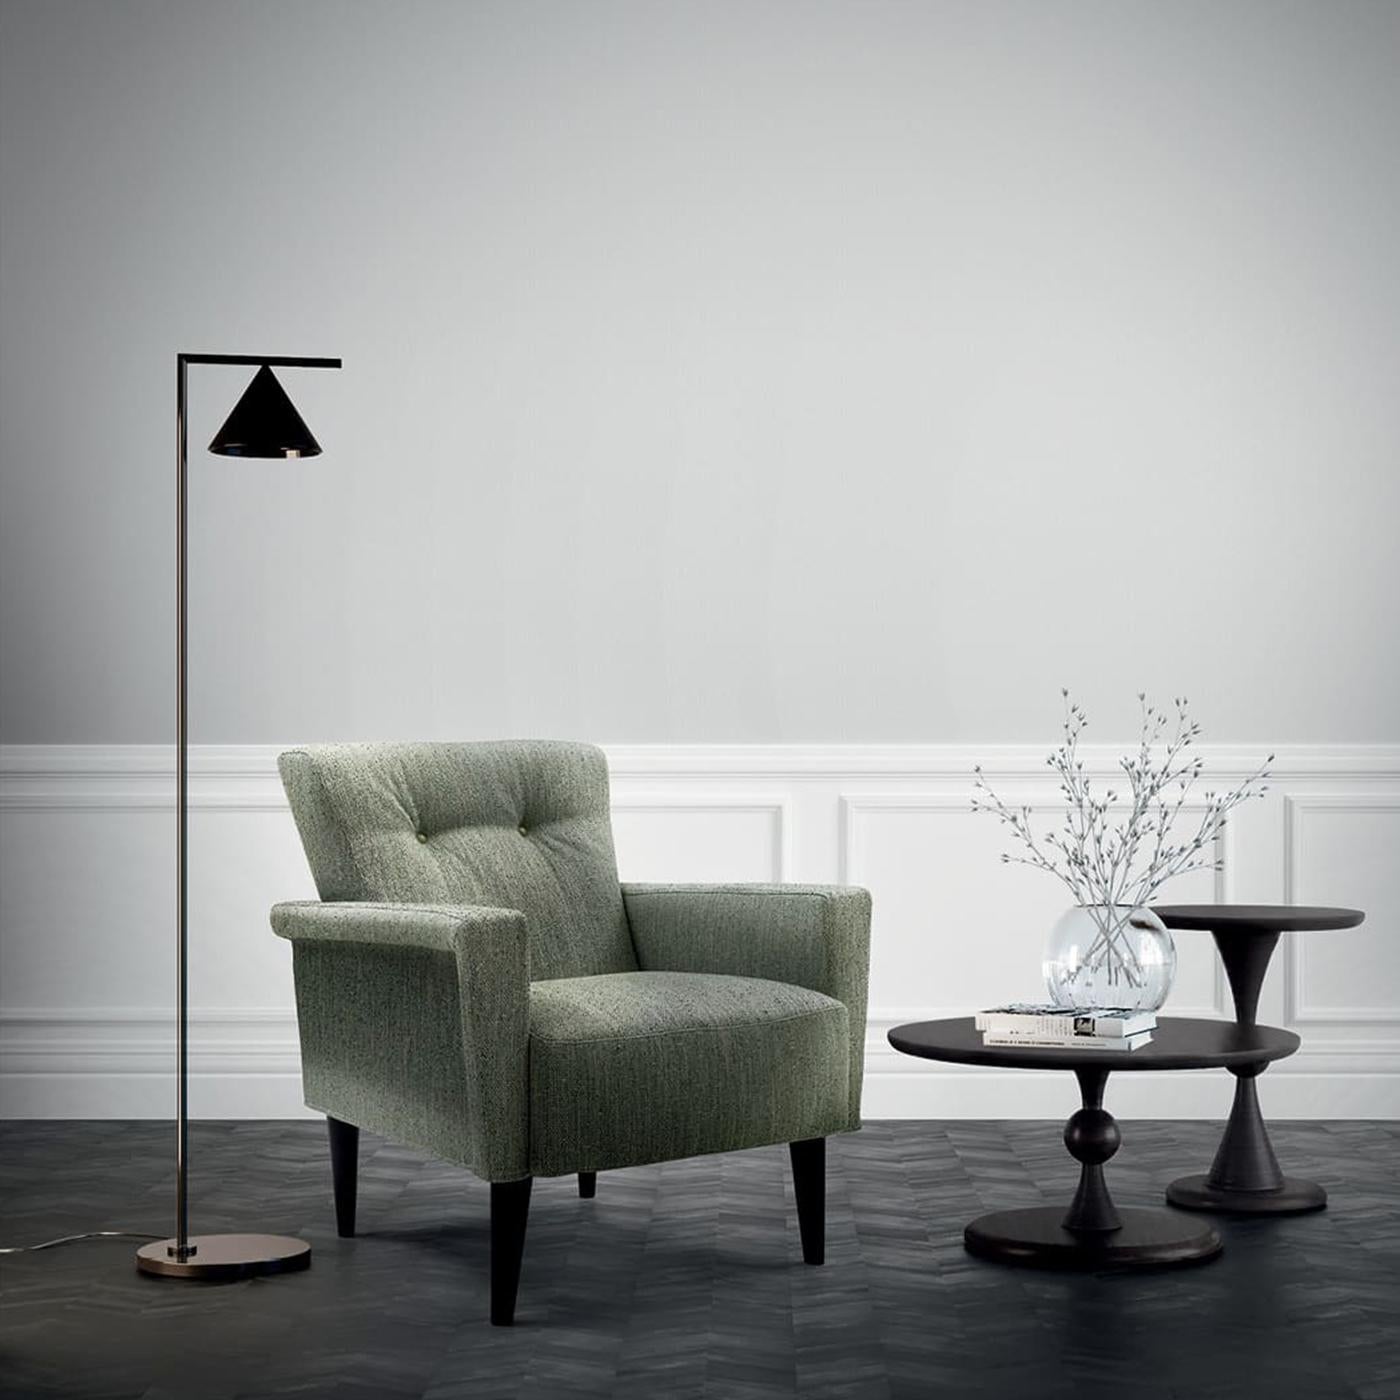 The clean lines and straight corners of this piece create a sophisticated silhouette whose curved backrest with a tufted texture adds a delicate accent. This elegant armchair is ideal for any corner of the house, where it will be a cozy seat for a